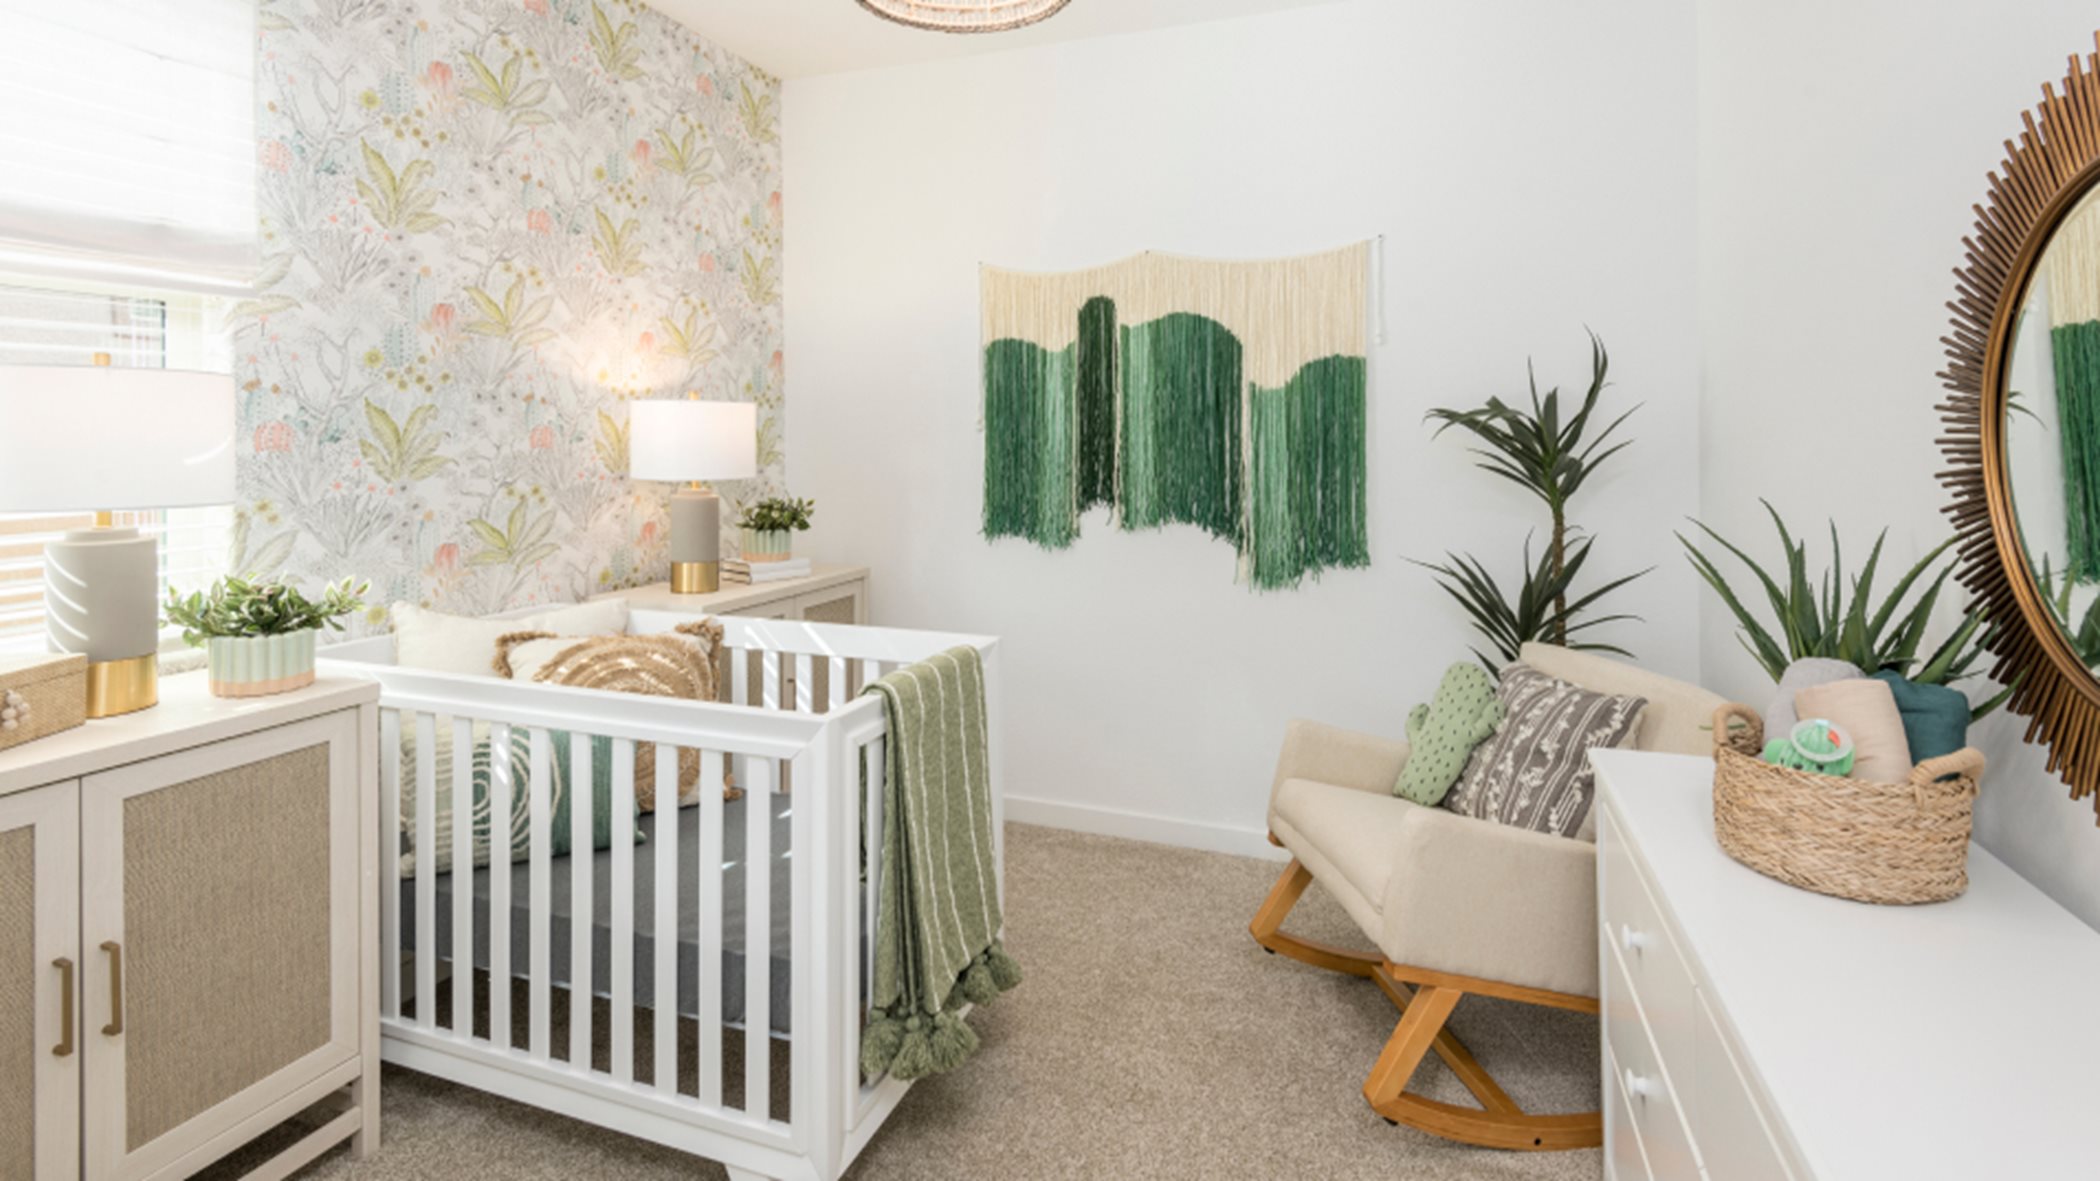 Bedroom furnished as a nursery